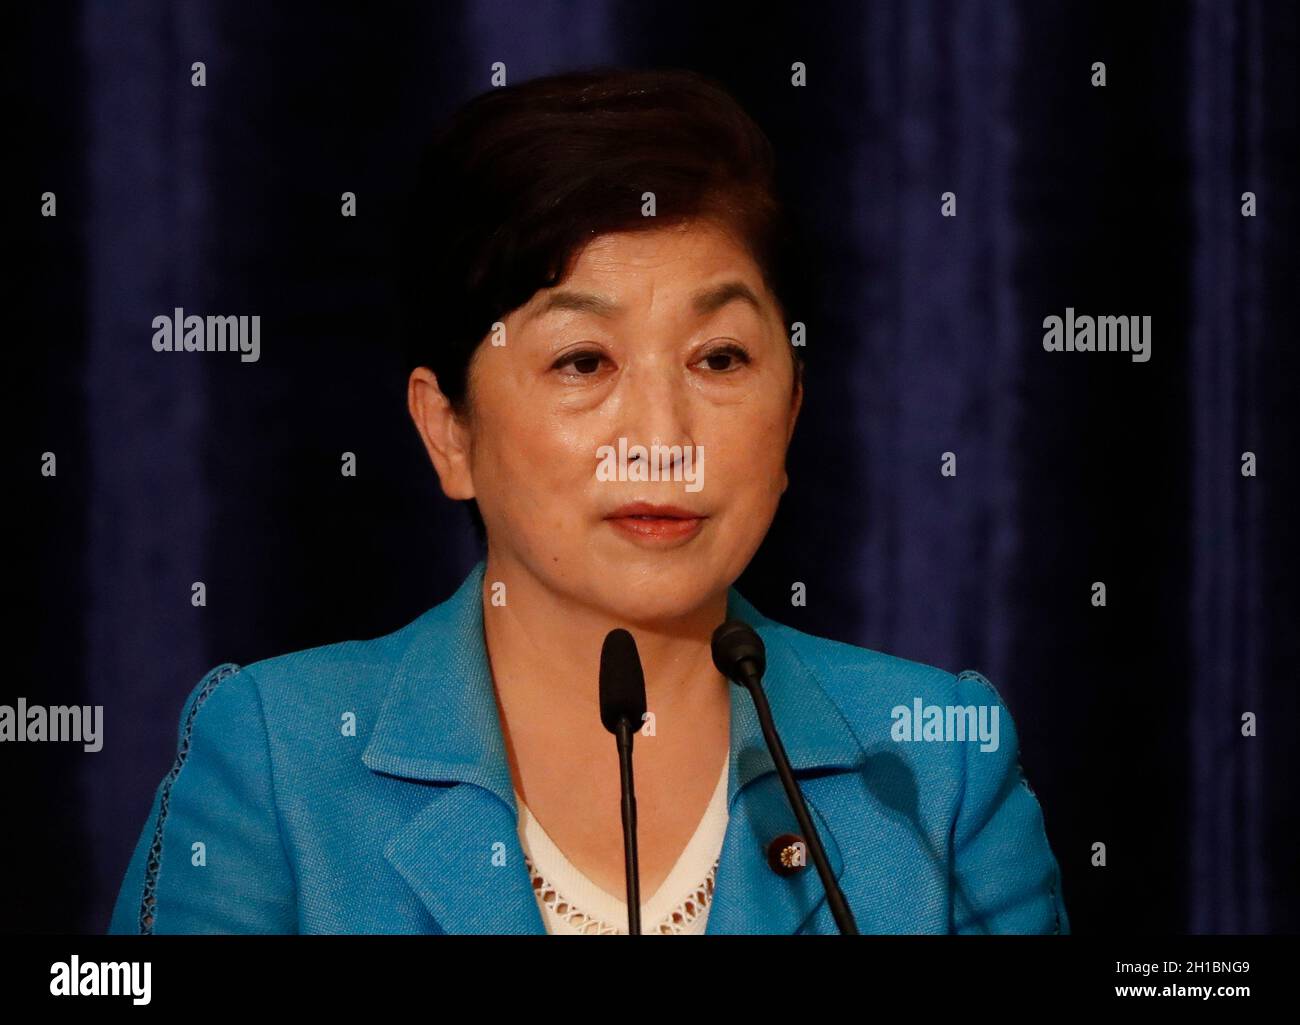 Tokyo, Japan. 18th Oct, 2021. The Social Democratic Party head Mizuho Fukushima attends a debate session with other leaders of Japan's main political parties, ahead of October 31, 2021 lower house election, at the Japan National Press Club in Tokyo, Japan October 18, 2021. (Photo by Issei Kato/SOPA Images/Sipa USA) Credit: Sipa USA/Alamy Live News Stock Photo